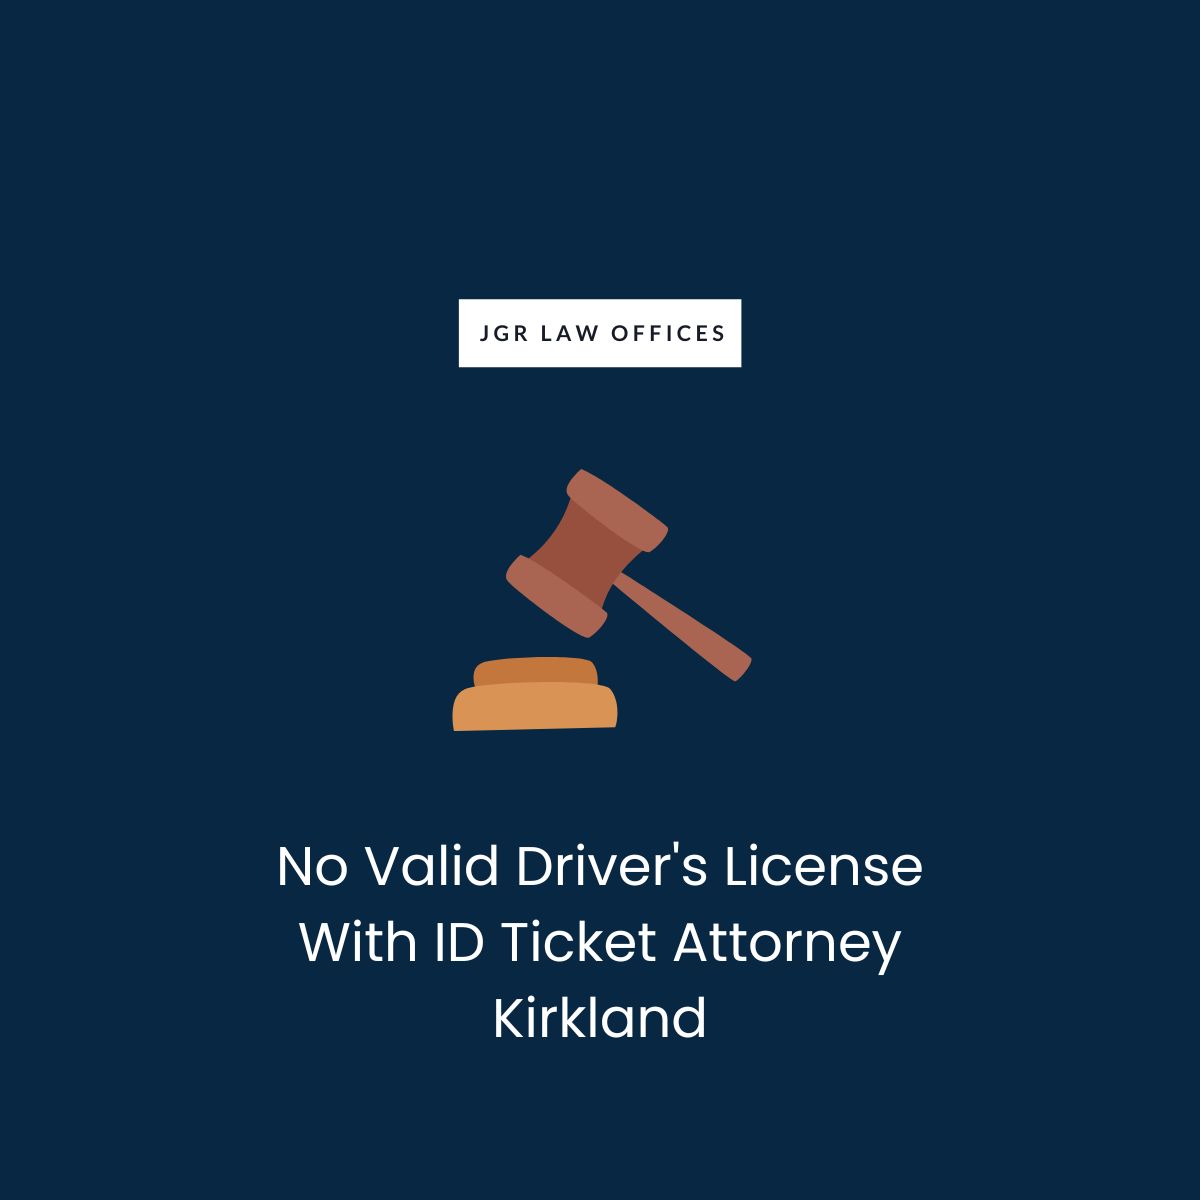 No Valid Driver's License With ID Ticket Attorney Kirkland